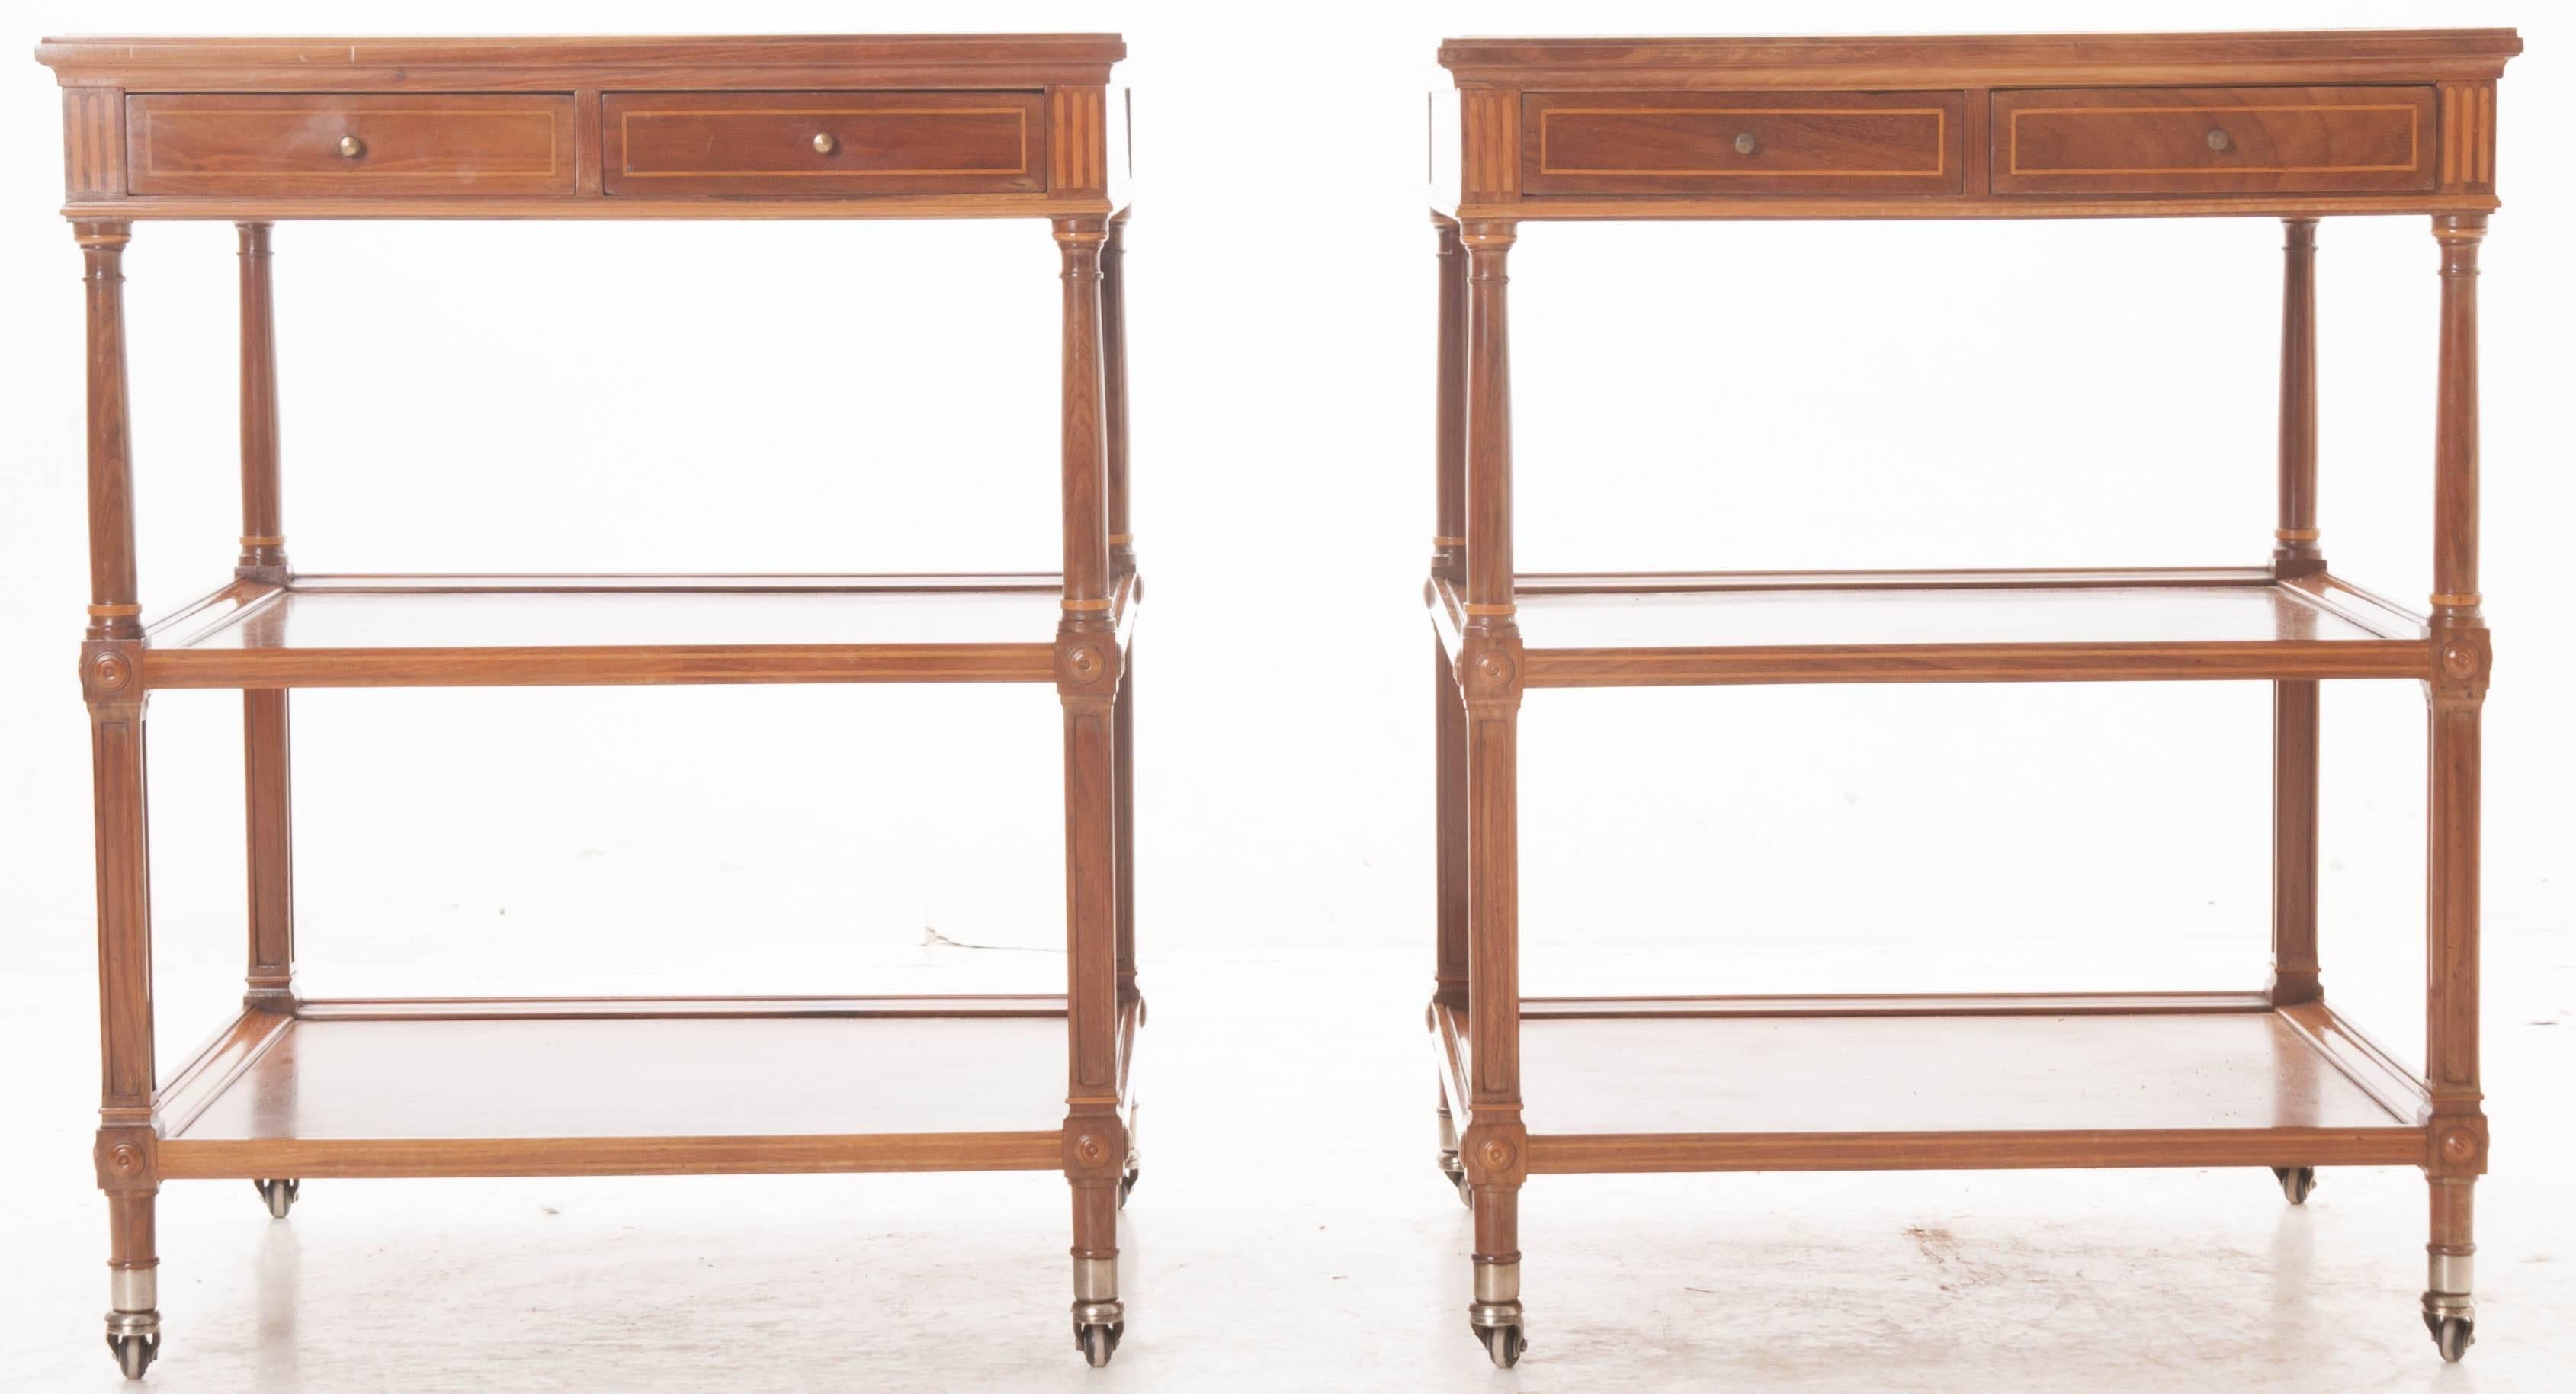 A darling pair of marble-top mahogany bedside tables from early 20th century France. Each table has a beautiful white marble-top that is flecked with gray veins and both tops are in excellent antique condition. The aprons each contain two small